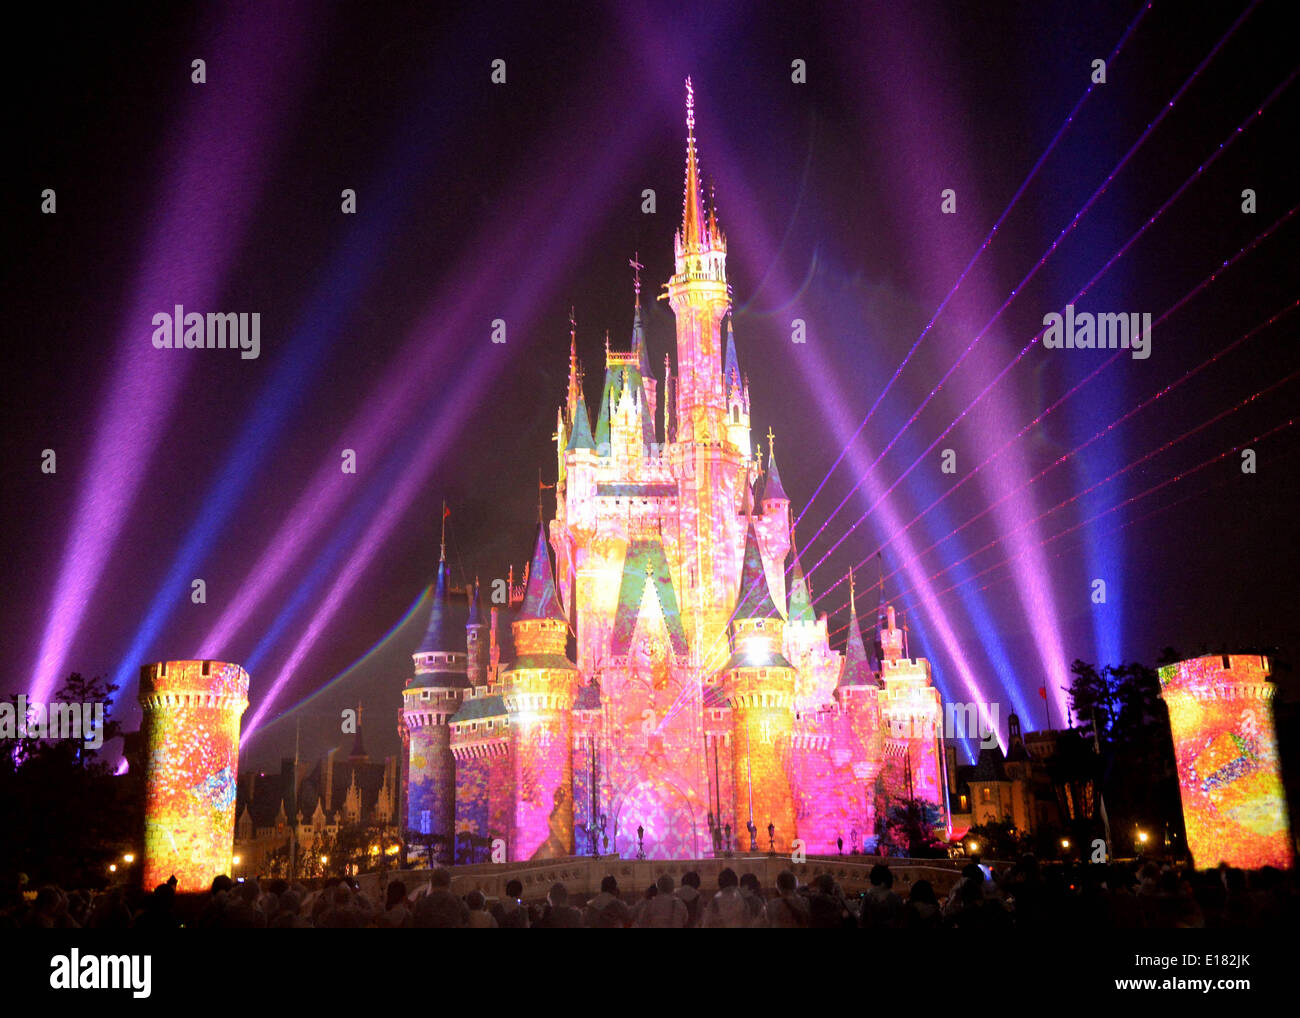 Tokyo, Japan. 26th May, 2014. Images of Disney characters are projected on the Cinderella castle at a press preview of the new attraction 'Once upon a time' at Tokyo Disneyland in Urayasu, suburban Tokyo, Japan, on May 26, 2014. Disney theme park will start the new attraction using projection mapping from May 29. © Ma Ping/Xinhua/Alamy Live News Stock Photo